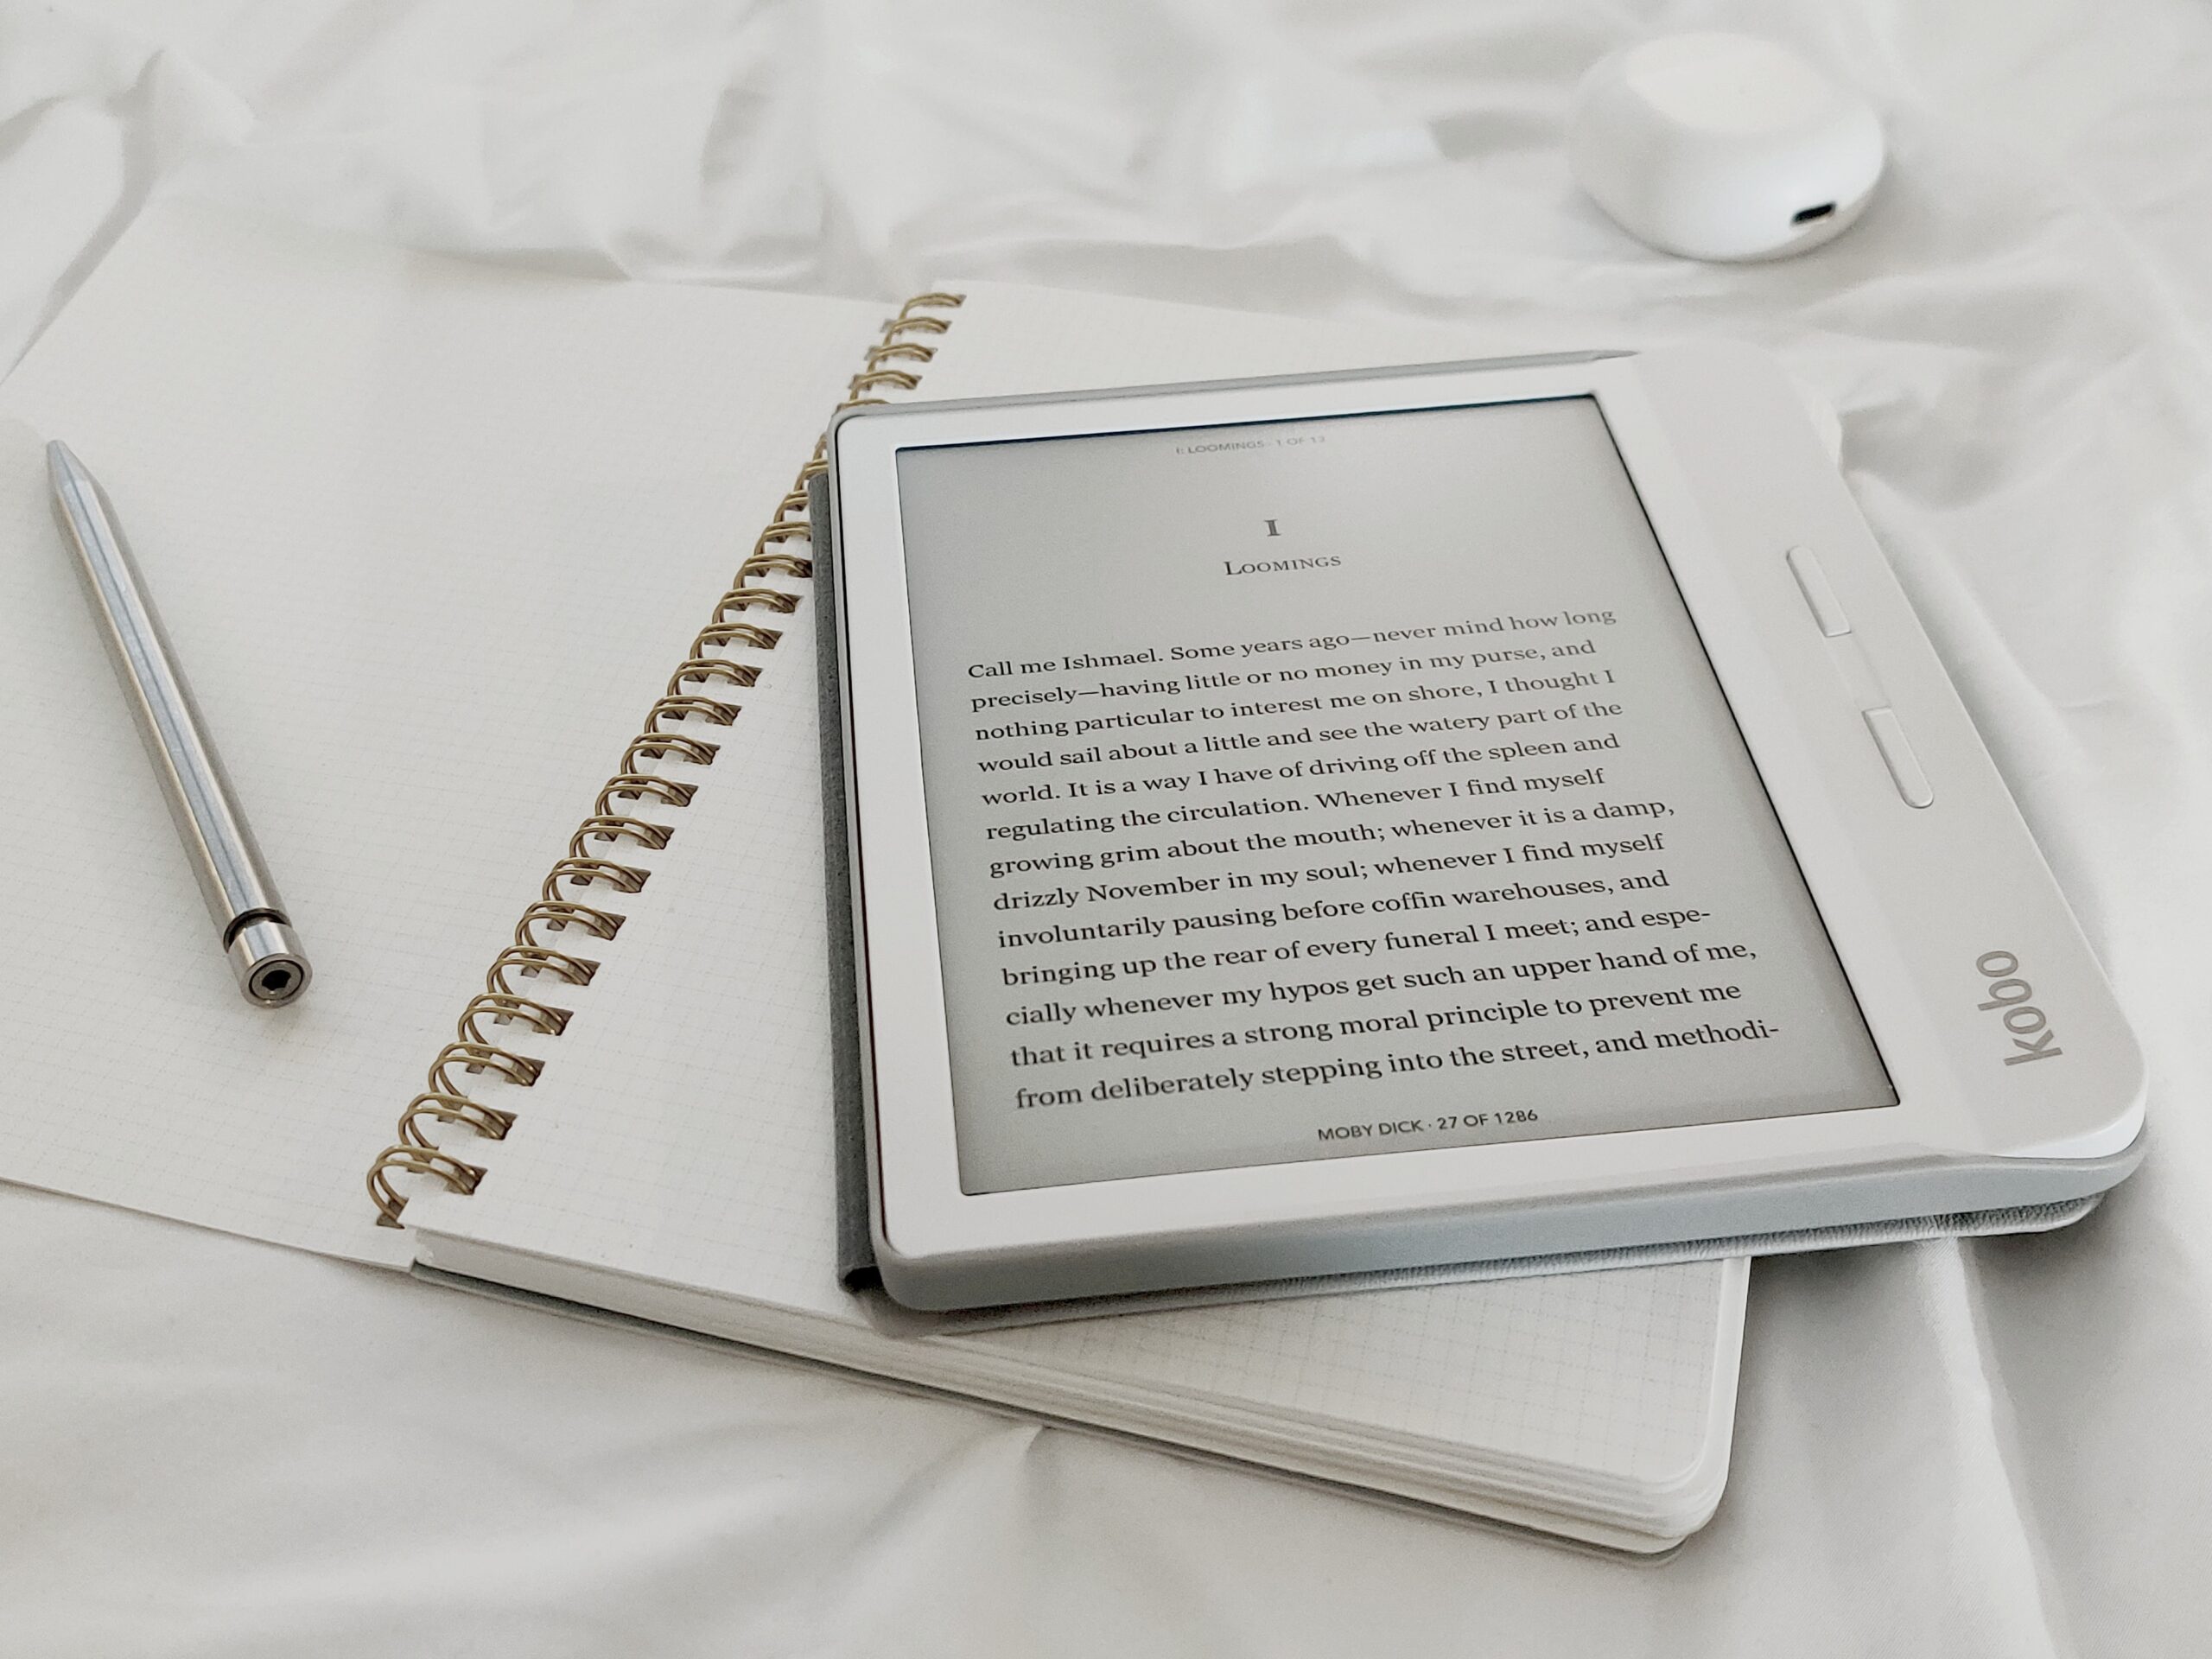 The Battle Between E-books and Physical Books: Will the Digital Era Reign Supreme?